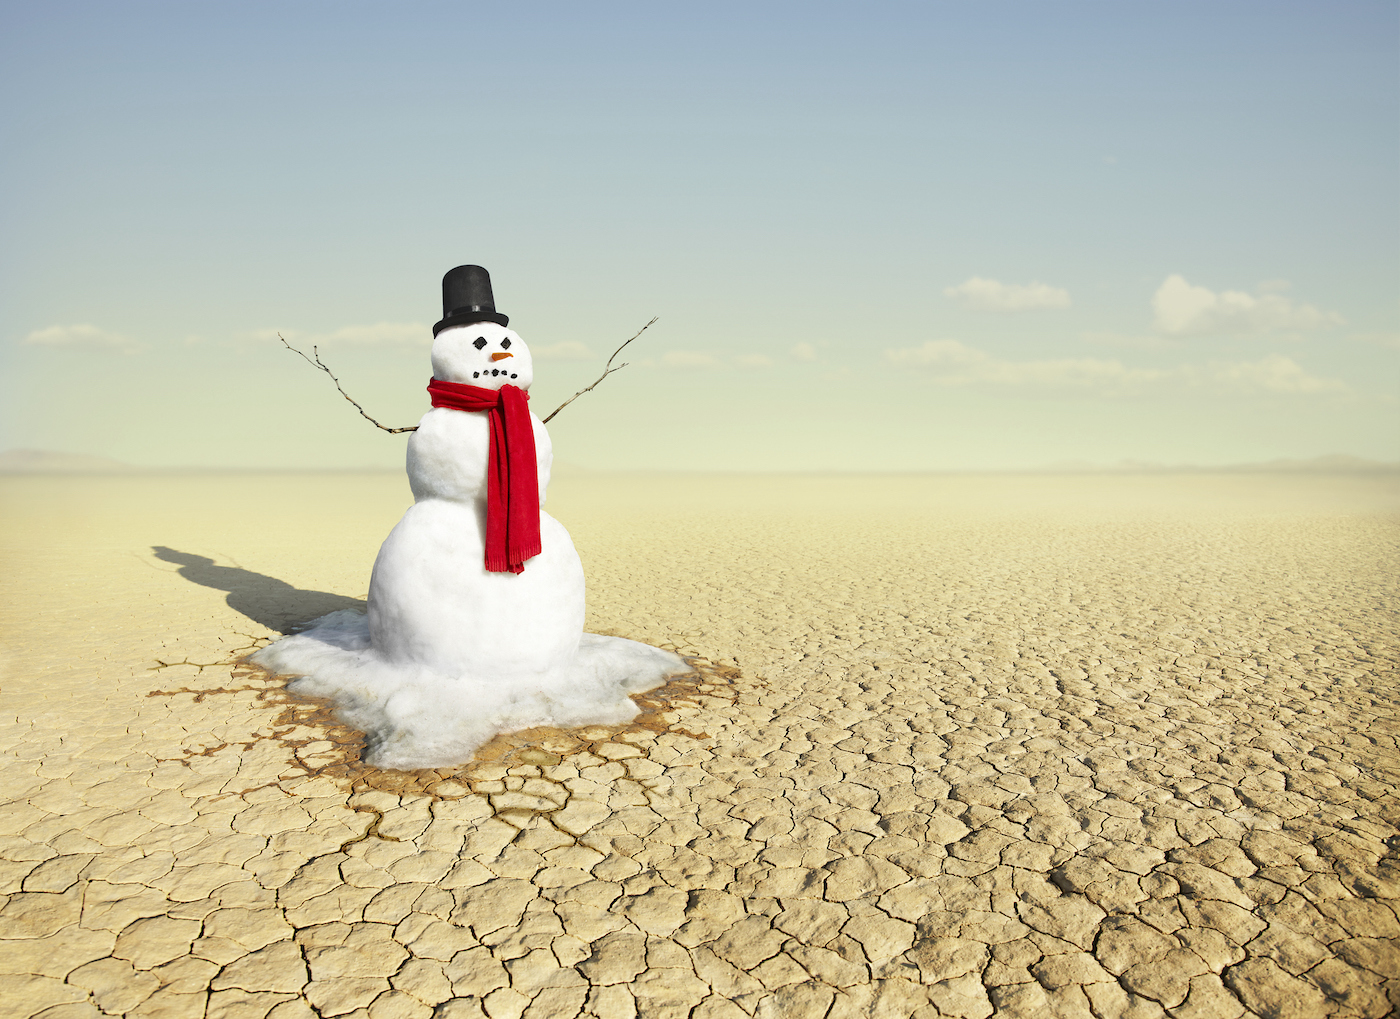 A classic snowman built and photographed at Cuddyback dry lake bed in the Mojave desert California, USA. Photographed with a Canon 1DS Mark II.